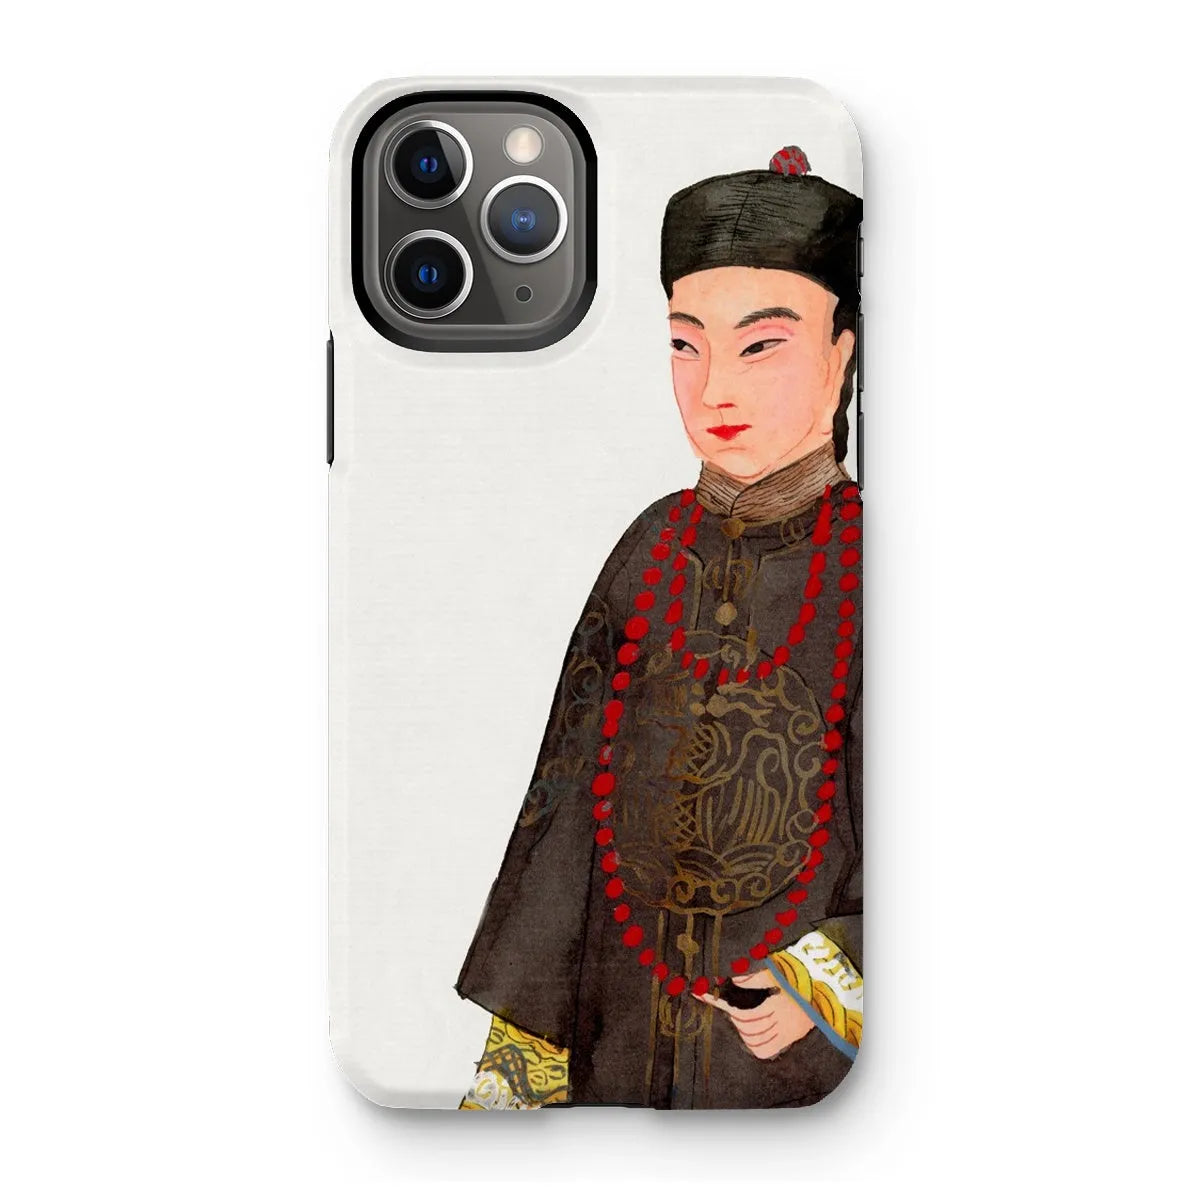 Emperor’s Courtier - Chinese Manchu Aesthetic Art Phone Case - Iphone 11 Pro / Matte - Mobile Phone Cases - Aesthetic